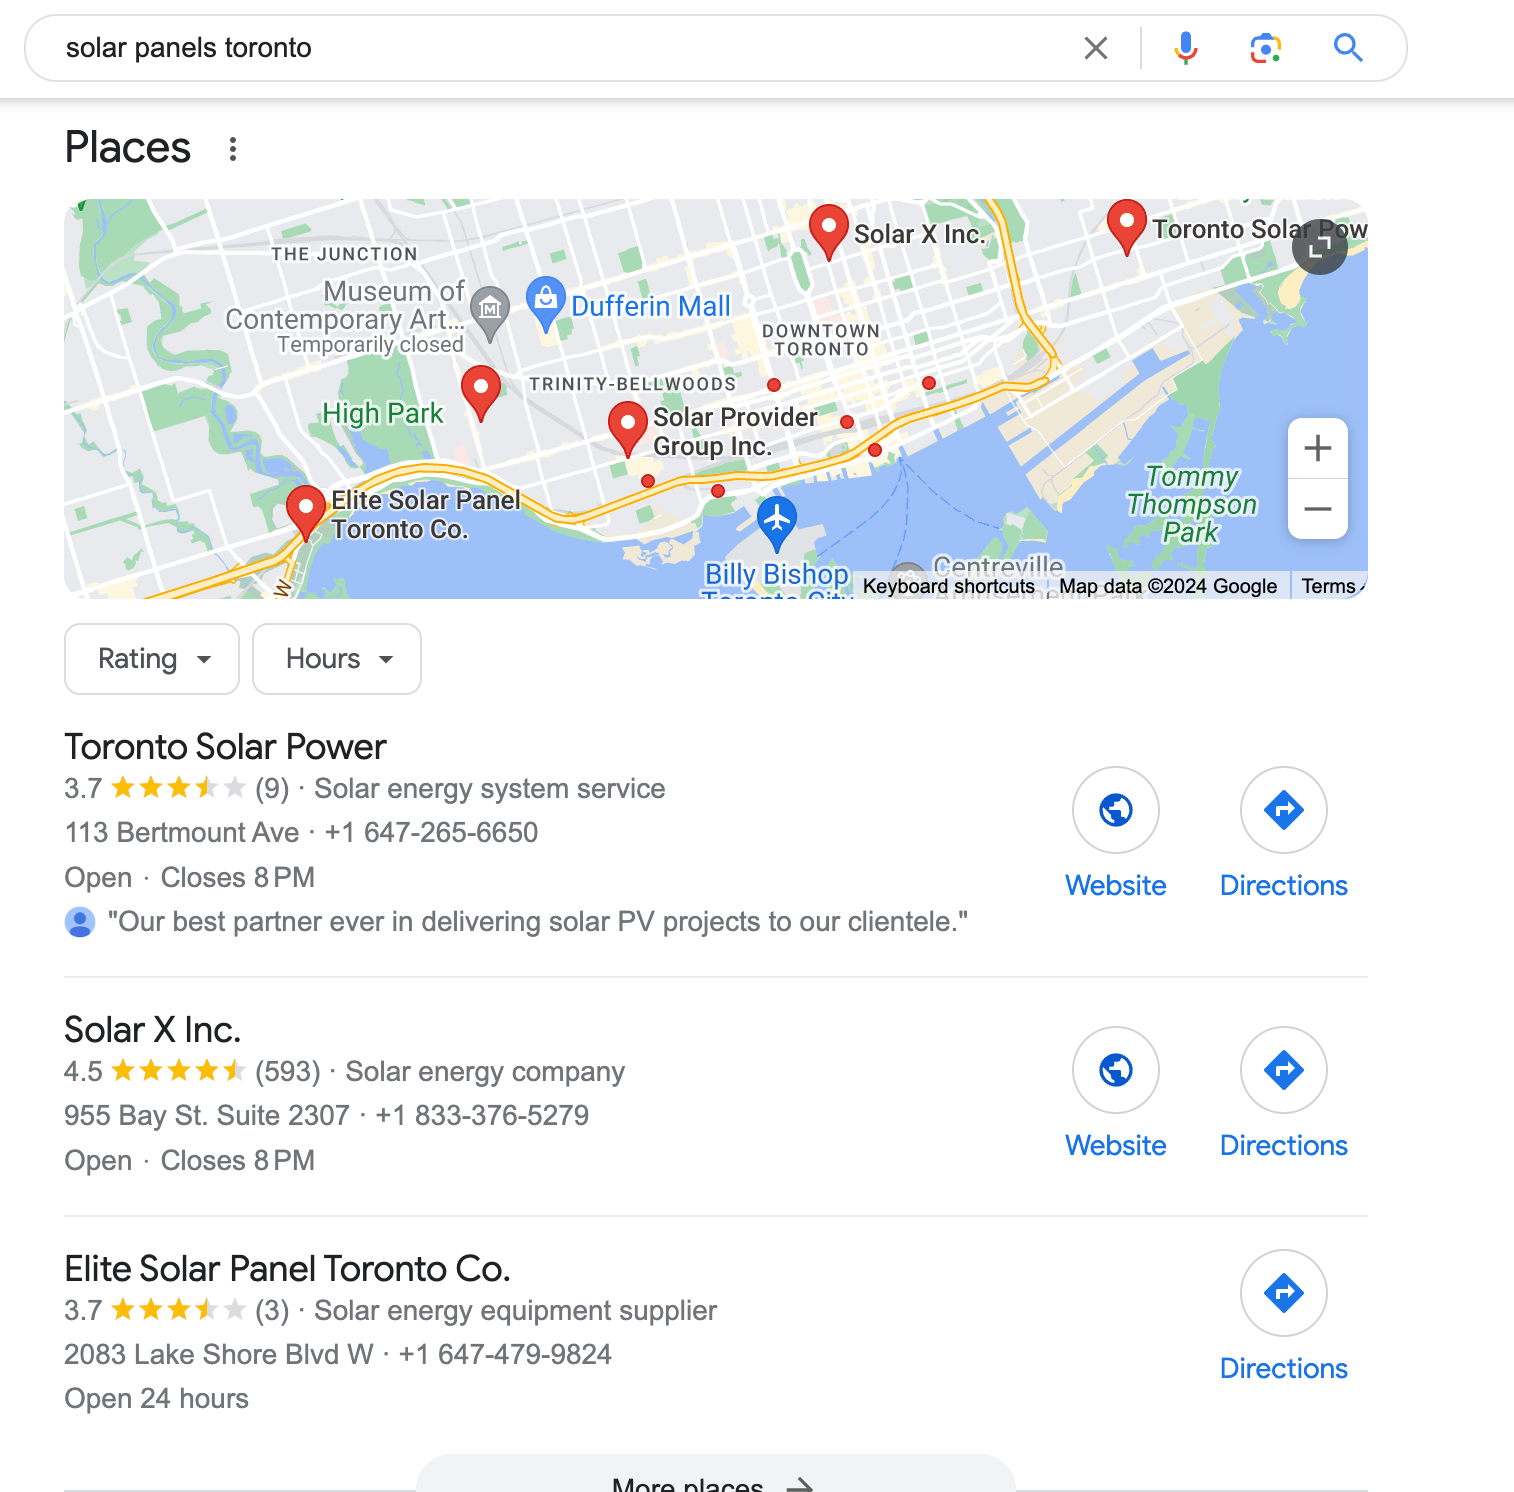 The Example of Google Business Profile ranking for solar panels in Toronto